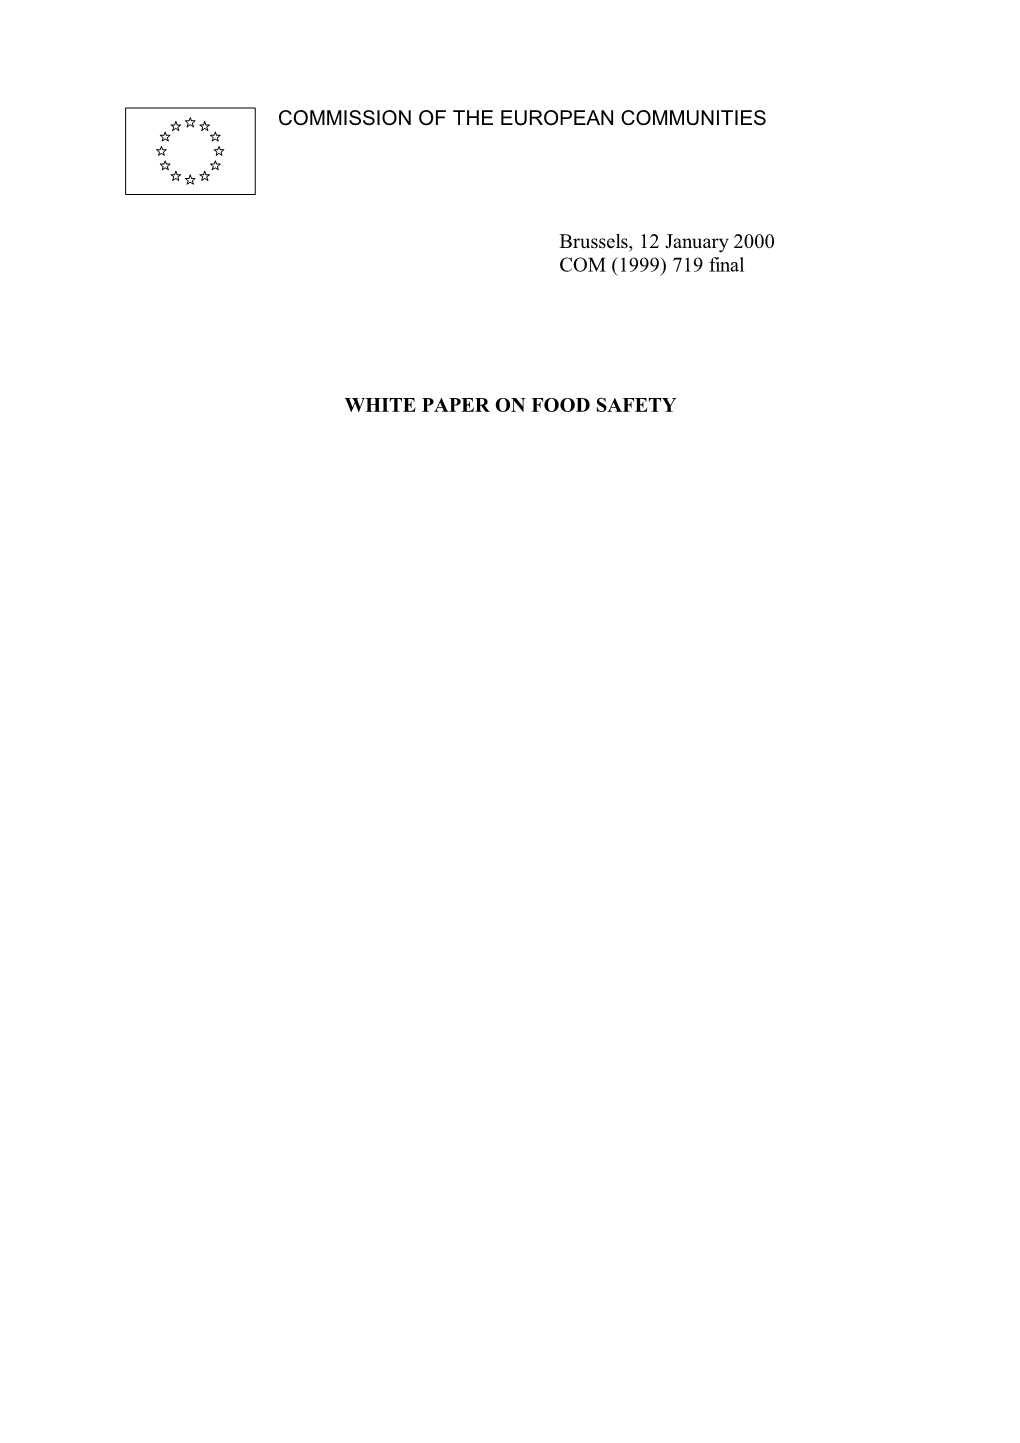 (1999) 719 Final WHITE PAPER on FOOD SAFETY